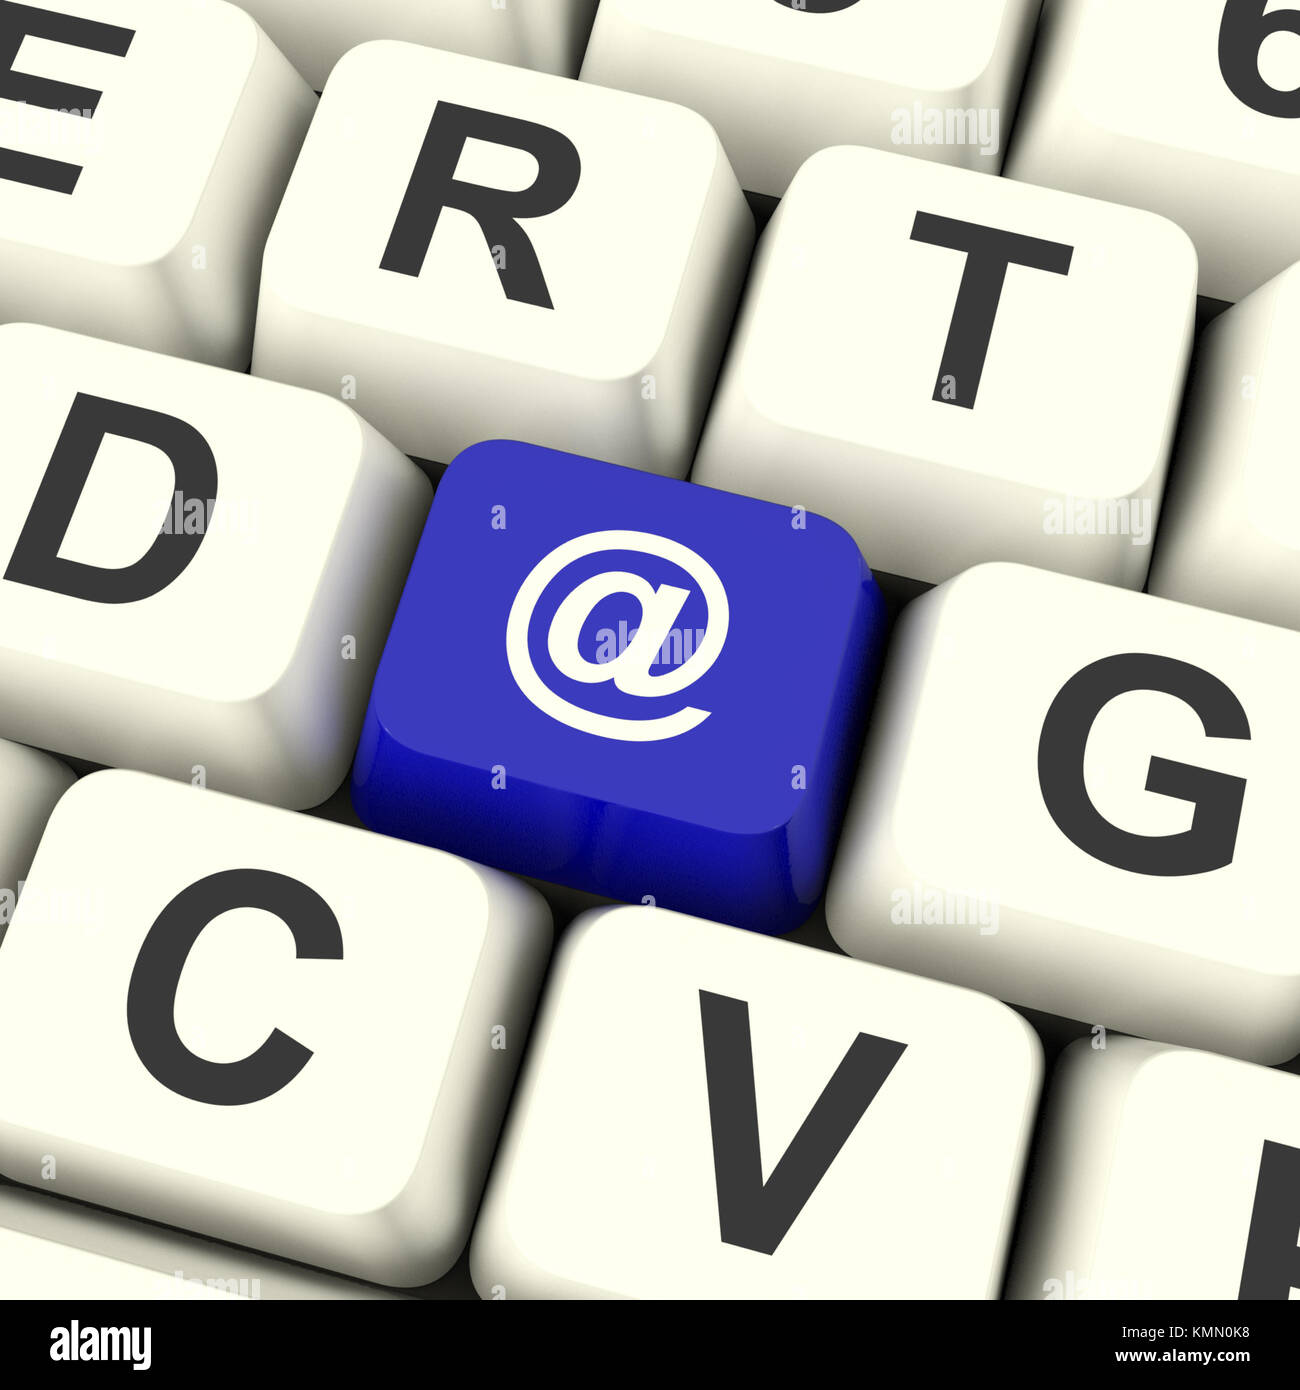 Email Computer Key In Blue For Emailing Or Contacting Stock Photo